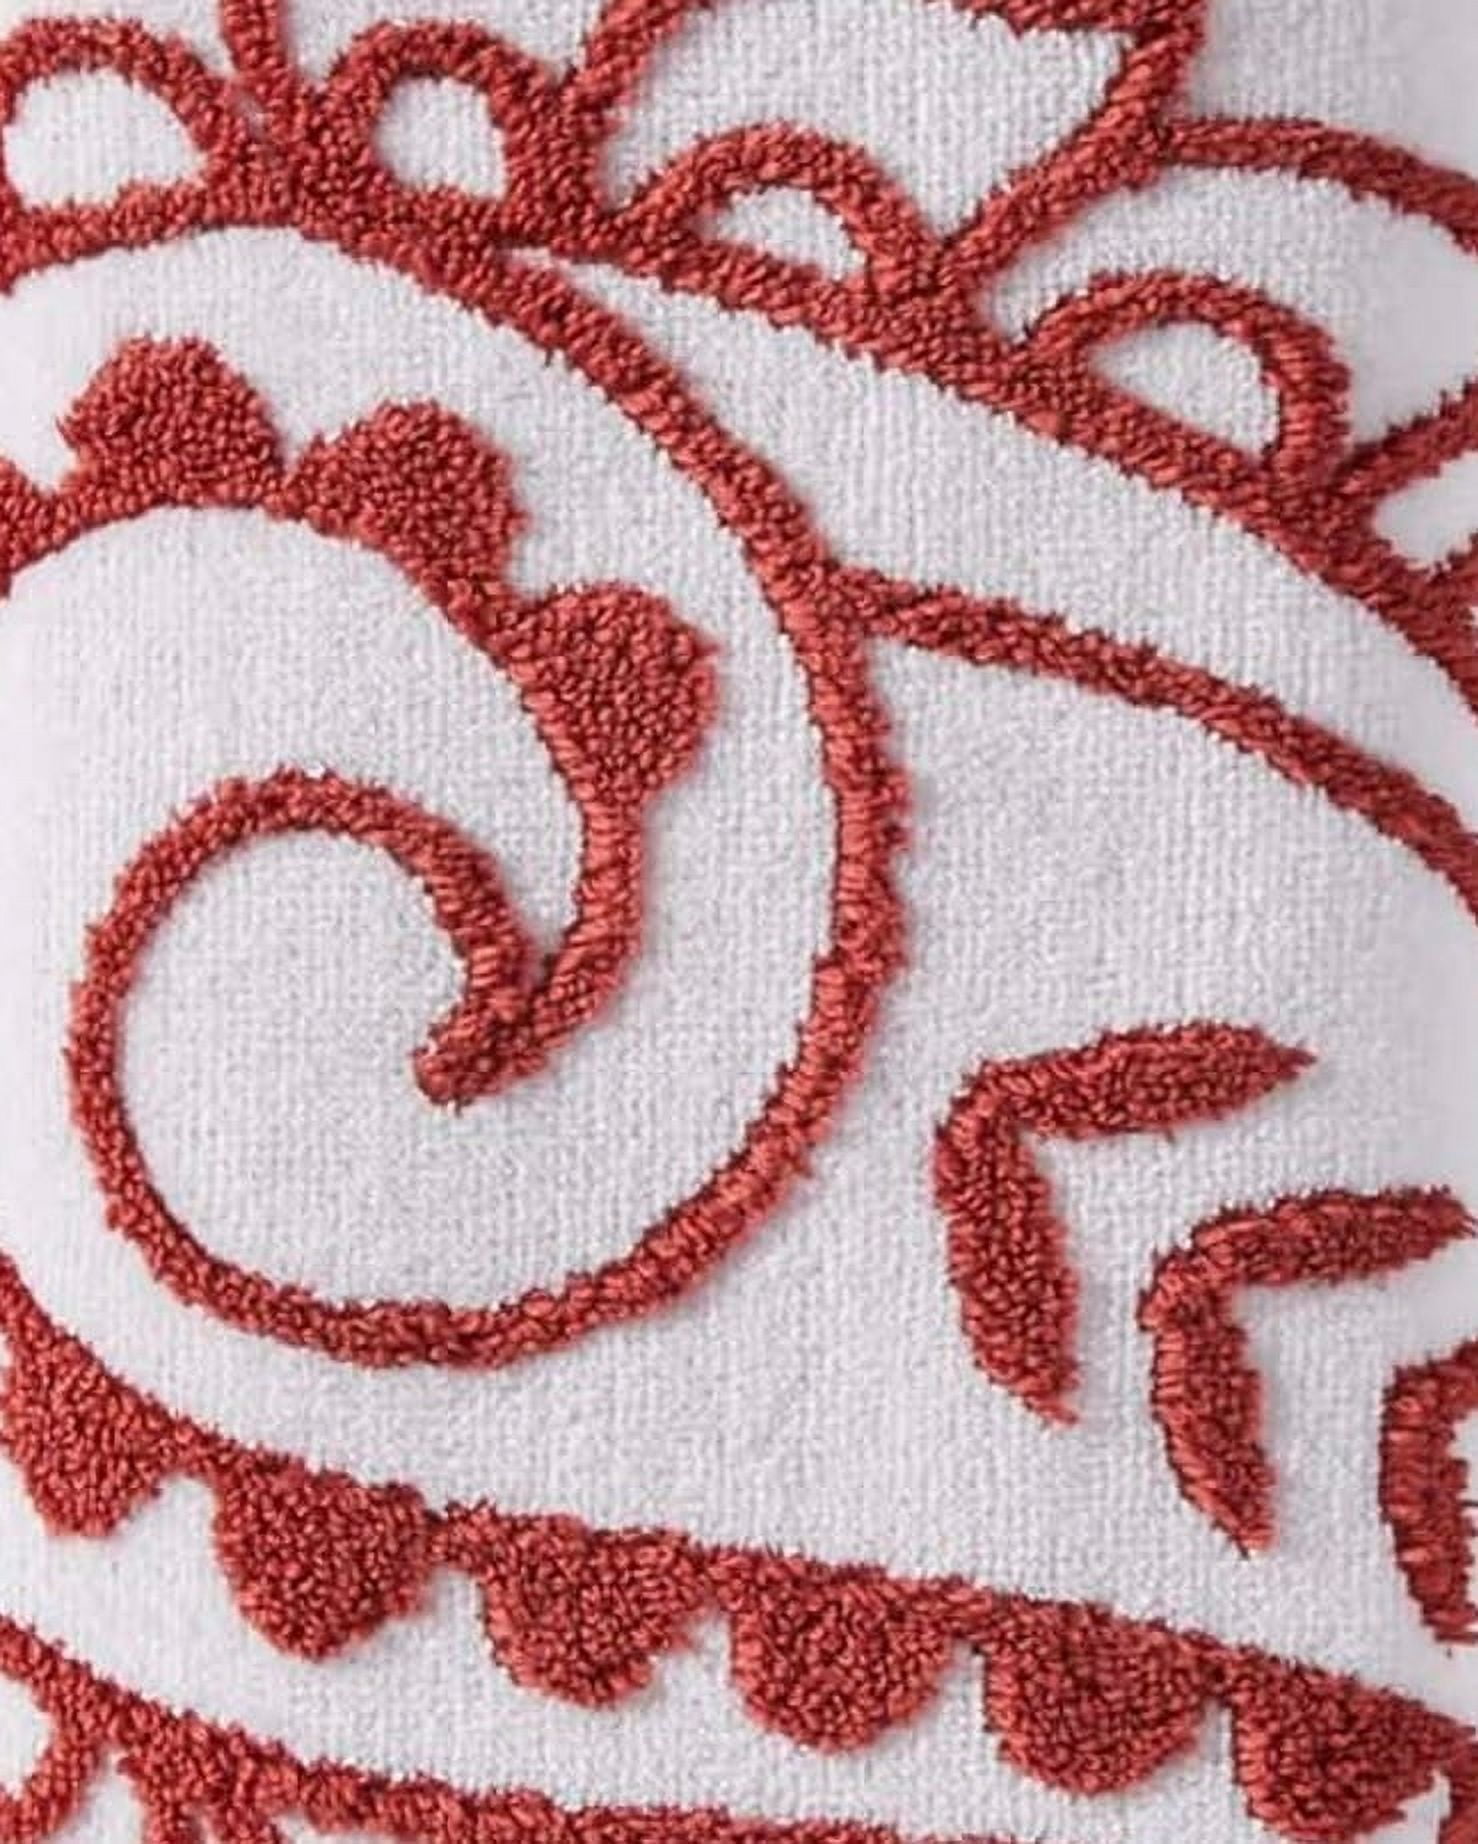 Soft Silver Bath Towel, Sheared Paisley, Better Homes & Gardens Towel  Collection